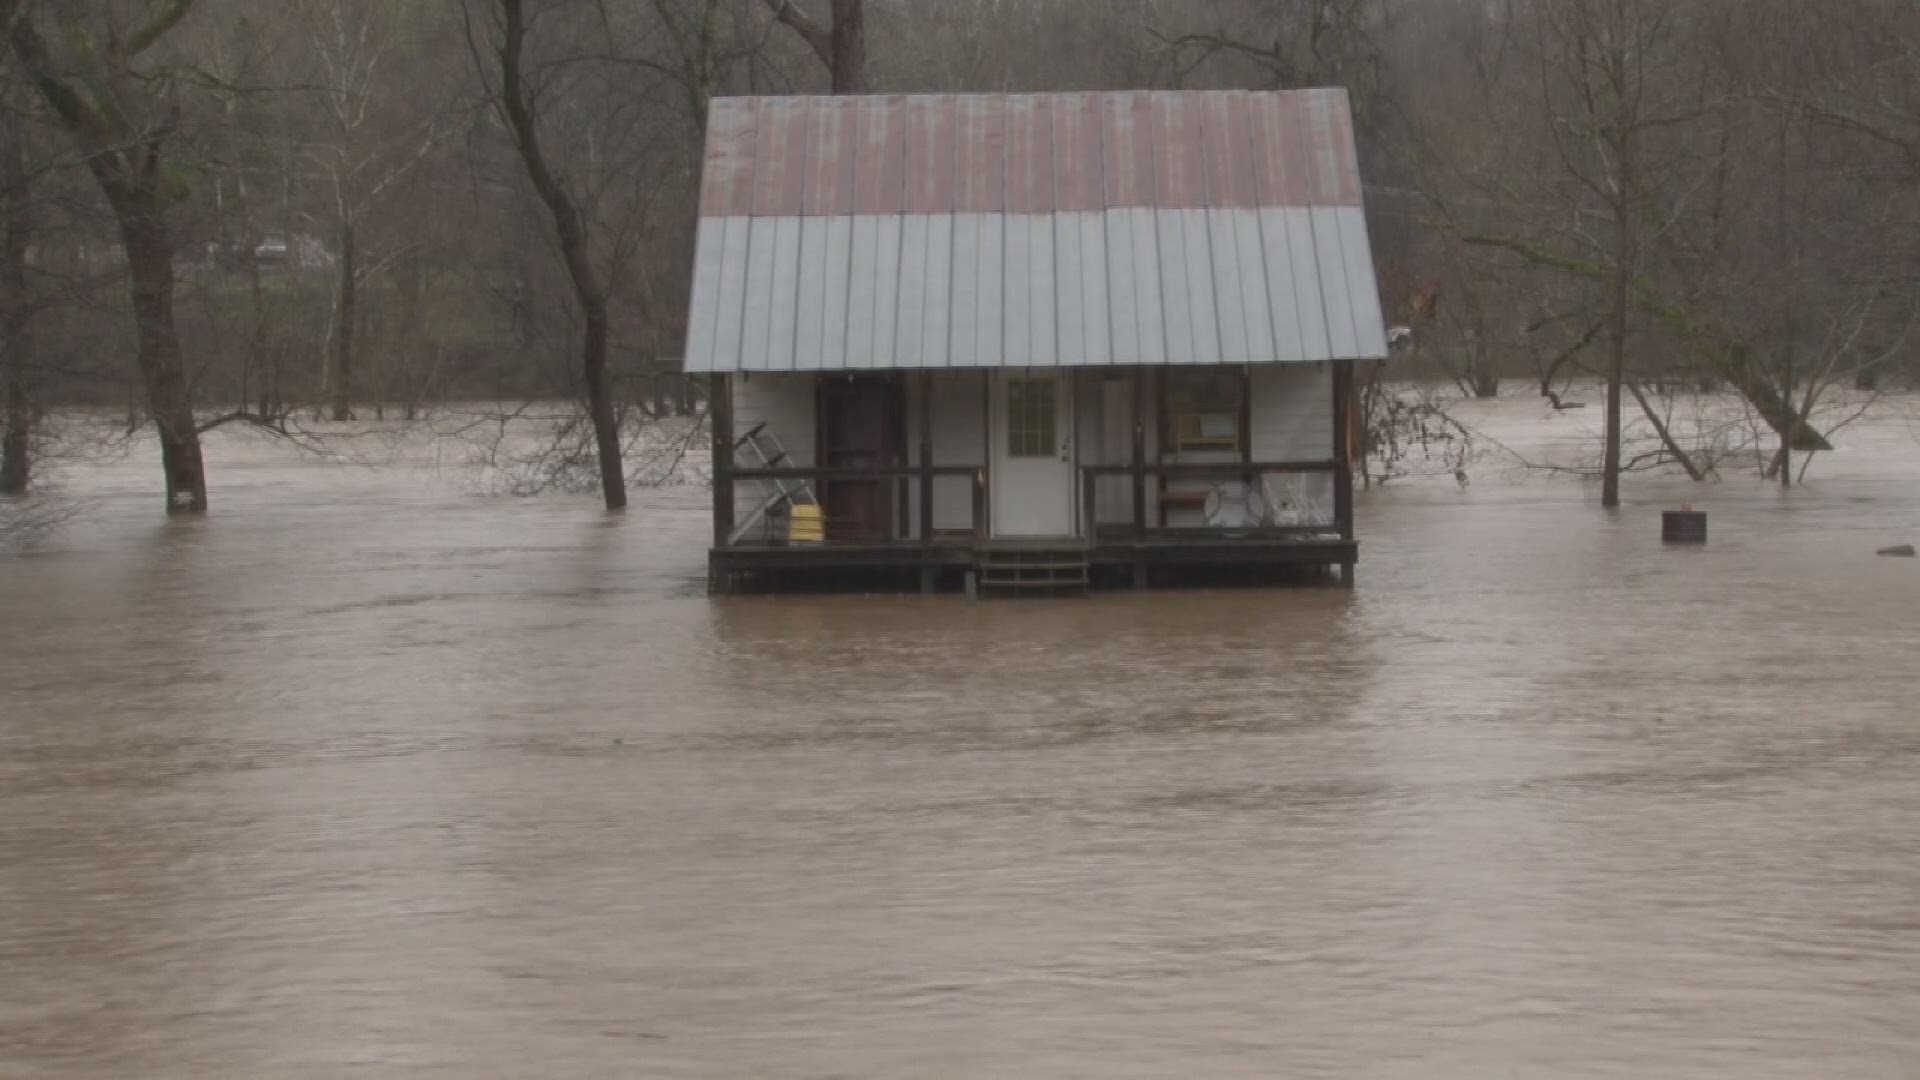 Several homes and businesses had to be evacuated in Townsend after Little River rapidly rose due to flooding Thursday afternoon.